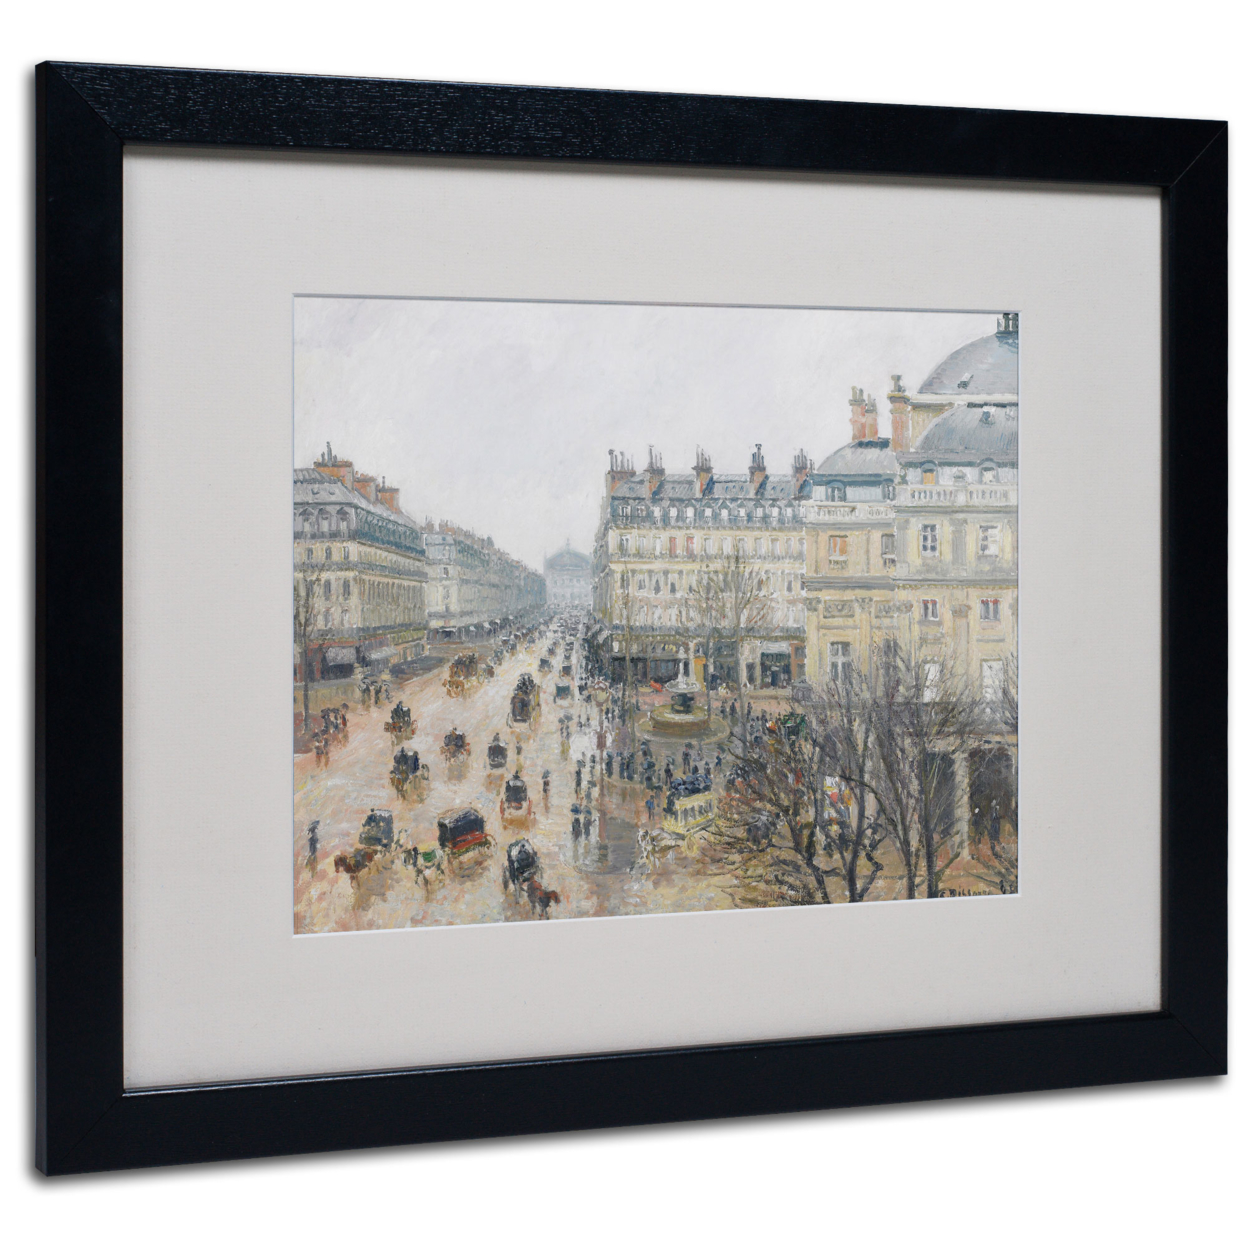 Camille Pissarro 'Place Du Theatre' Black Wooden Framed Art 18 X 22 Inches